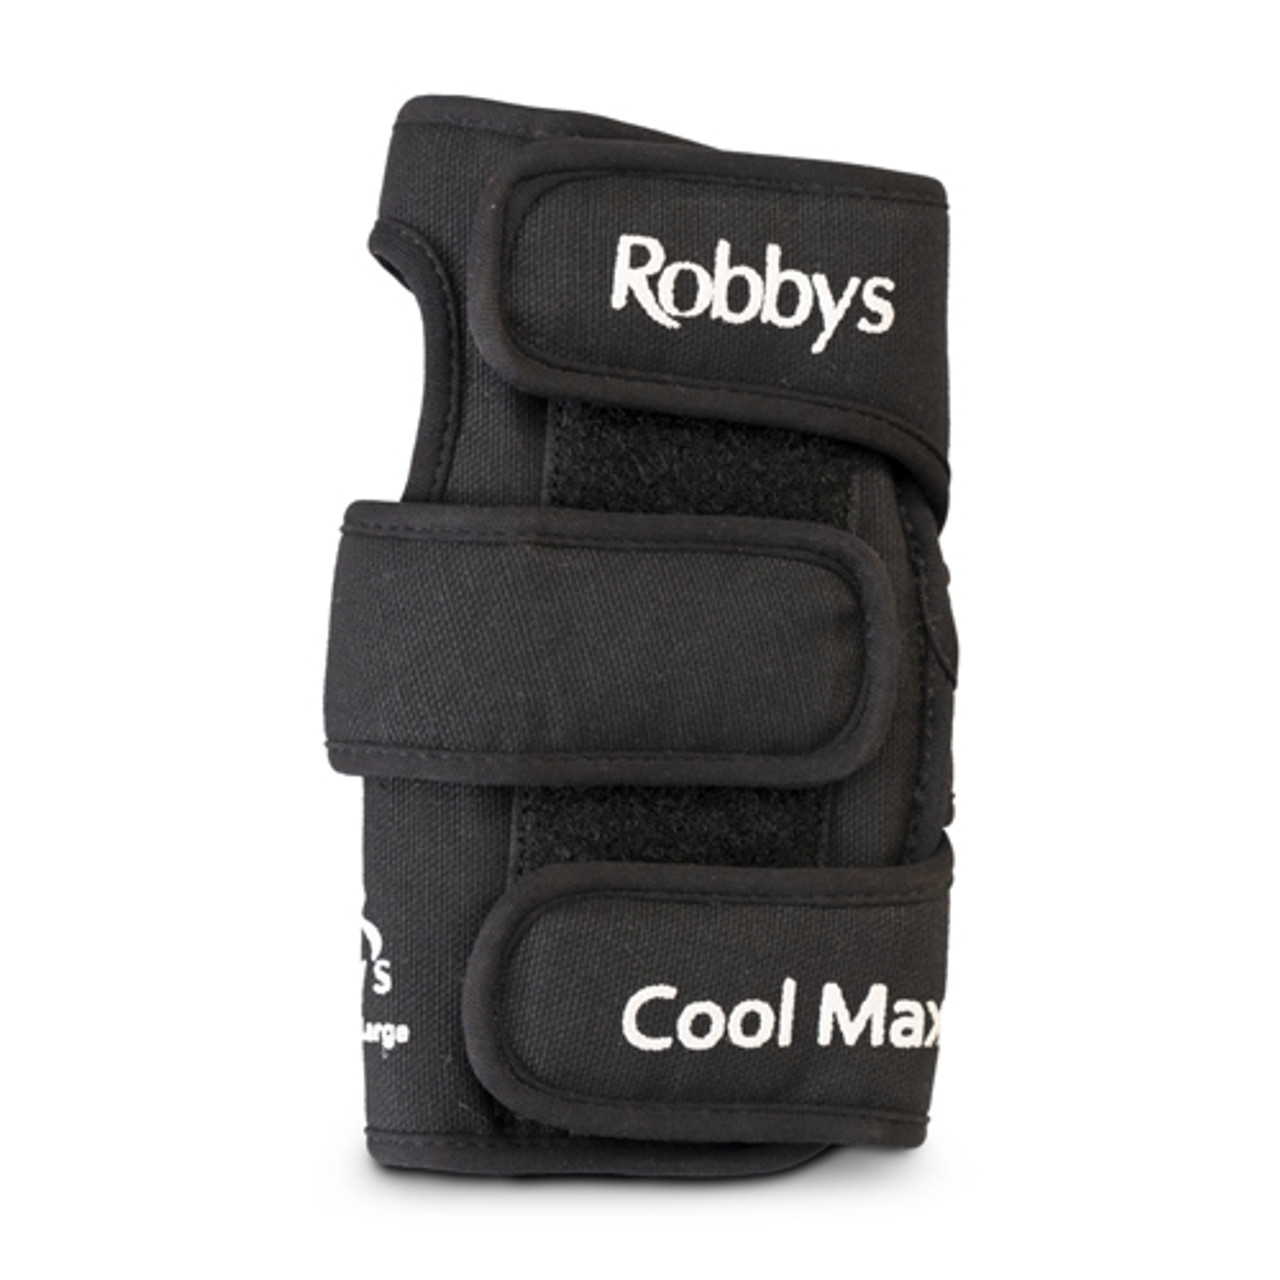 Robby's Cool Max Original Wrist Support Black